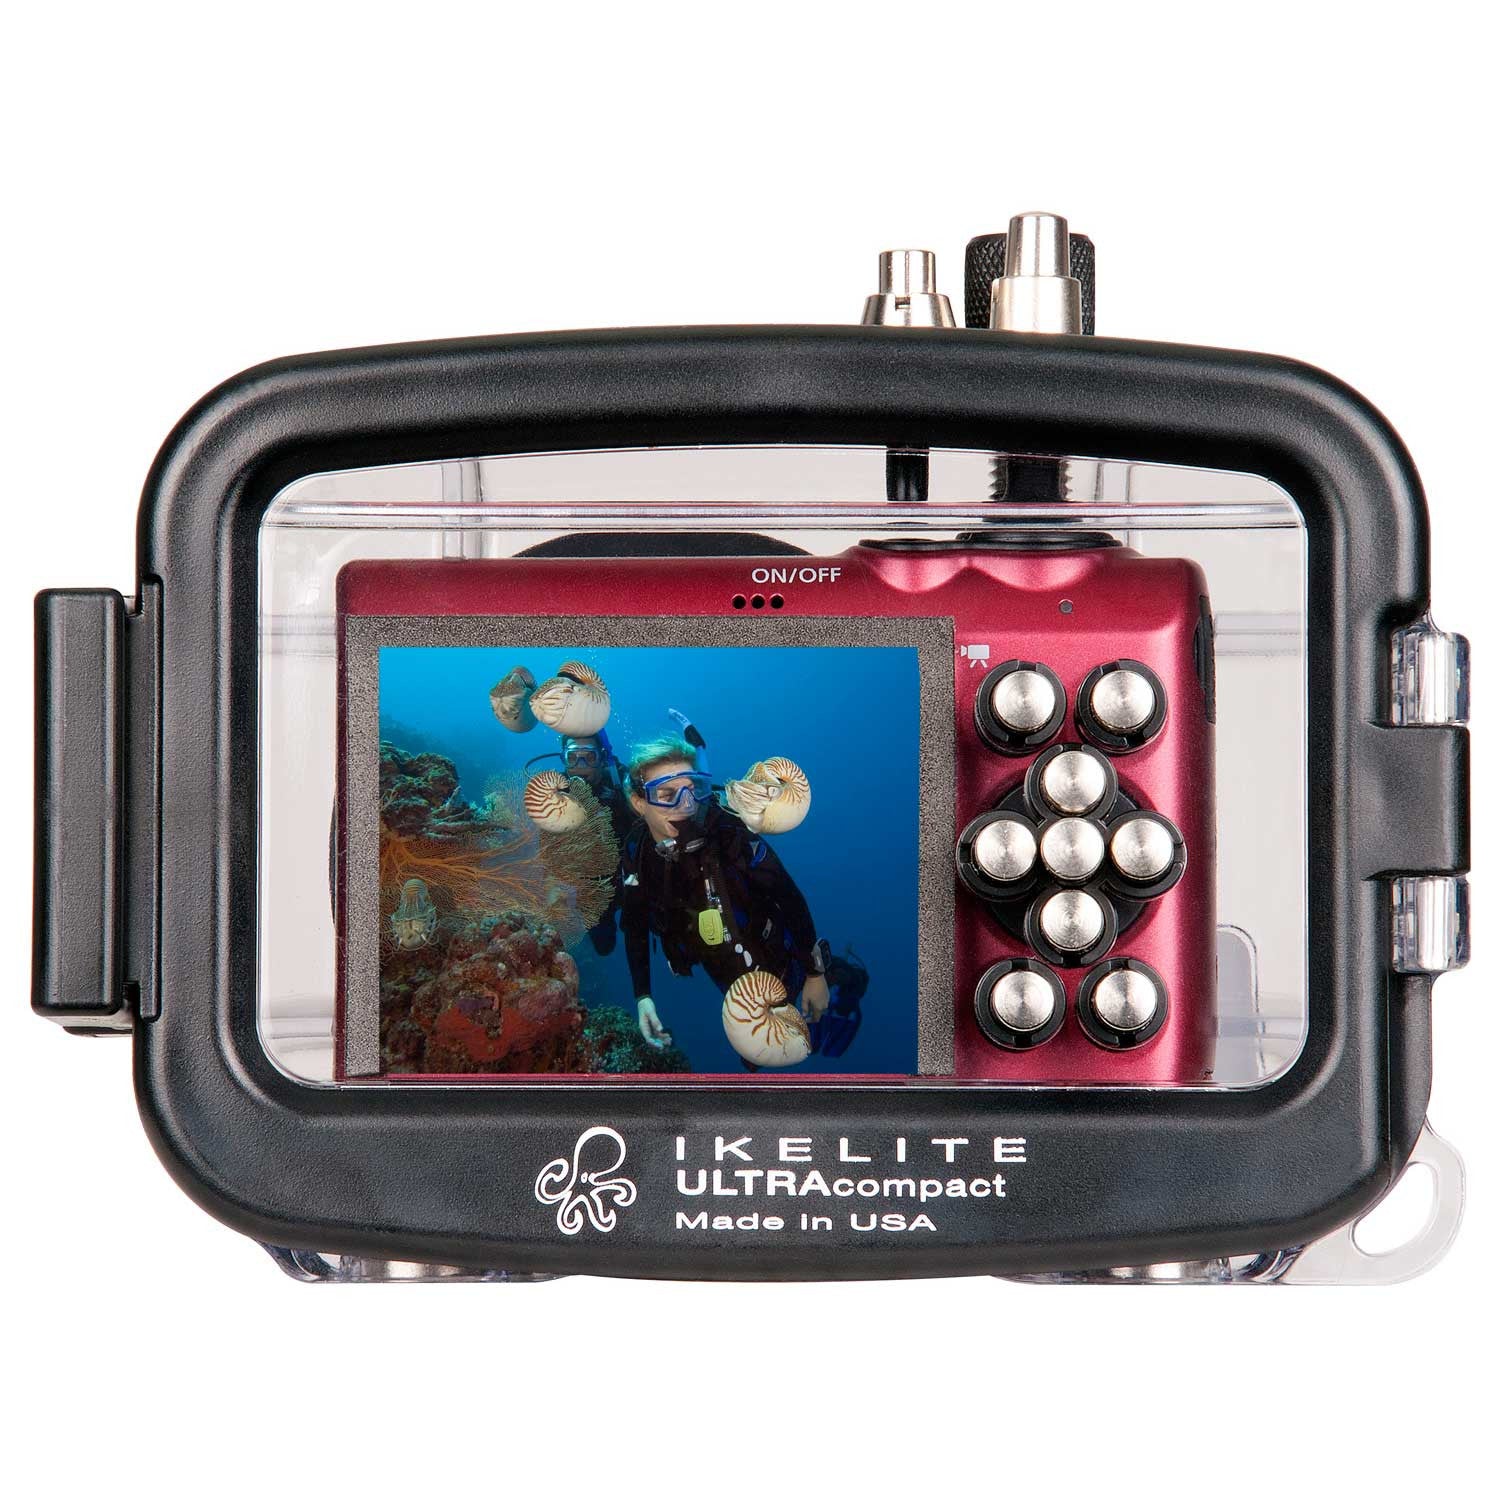 Underwater Housing for Canon PowerShot A810